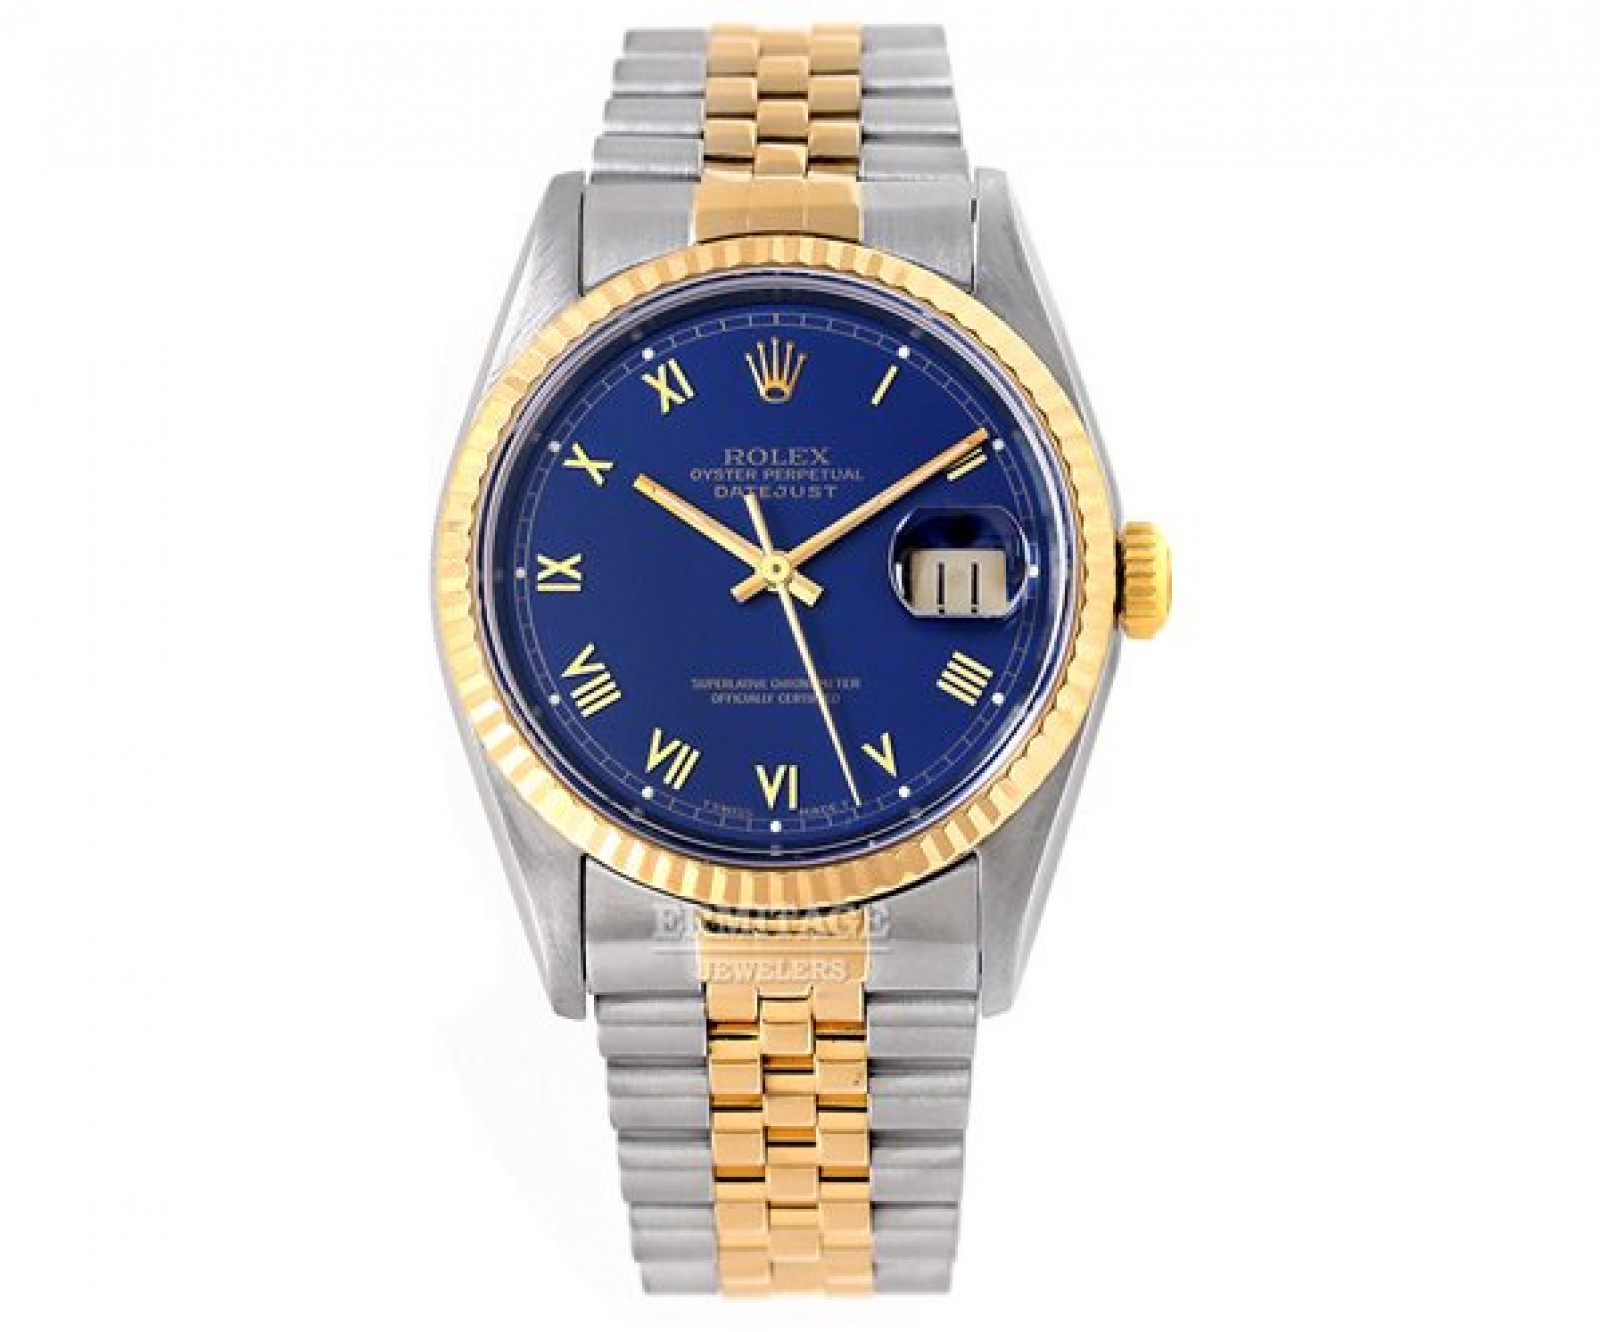 Pre-owned Rolex Datejust 16233 Selling in One Day